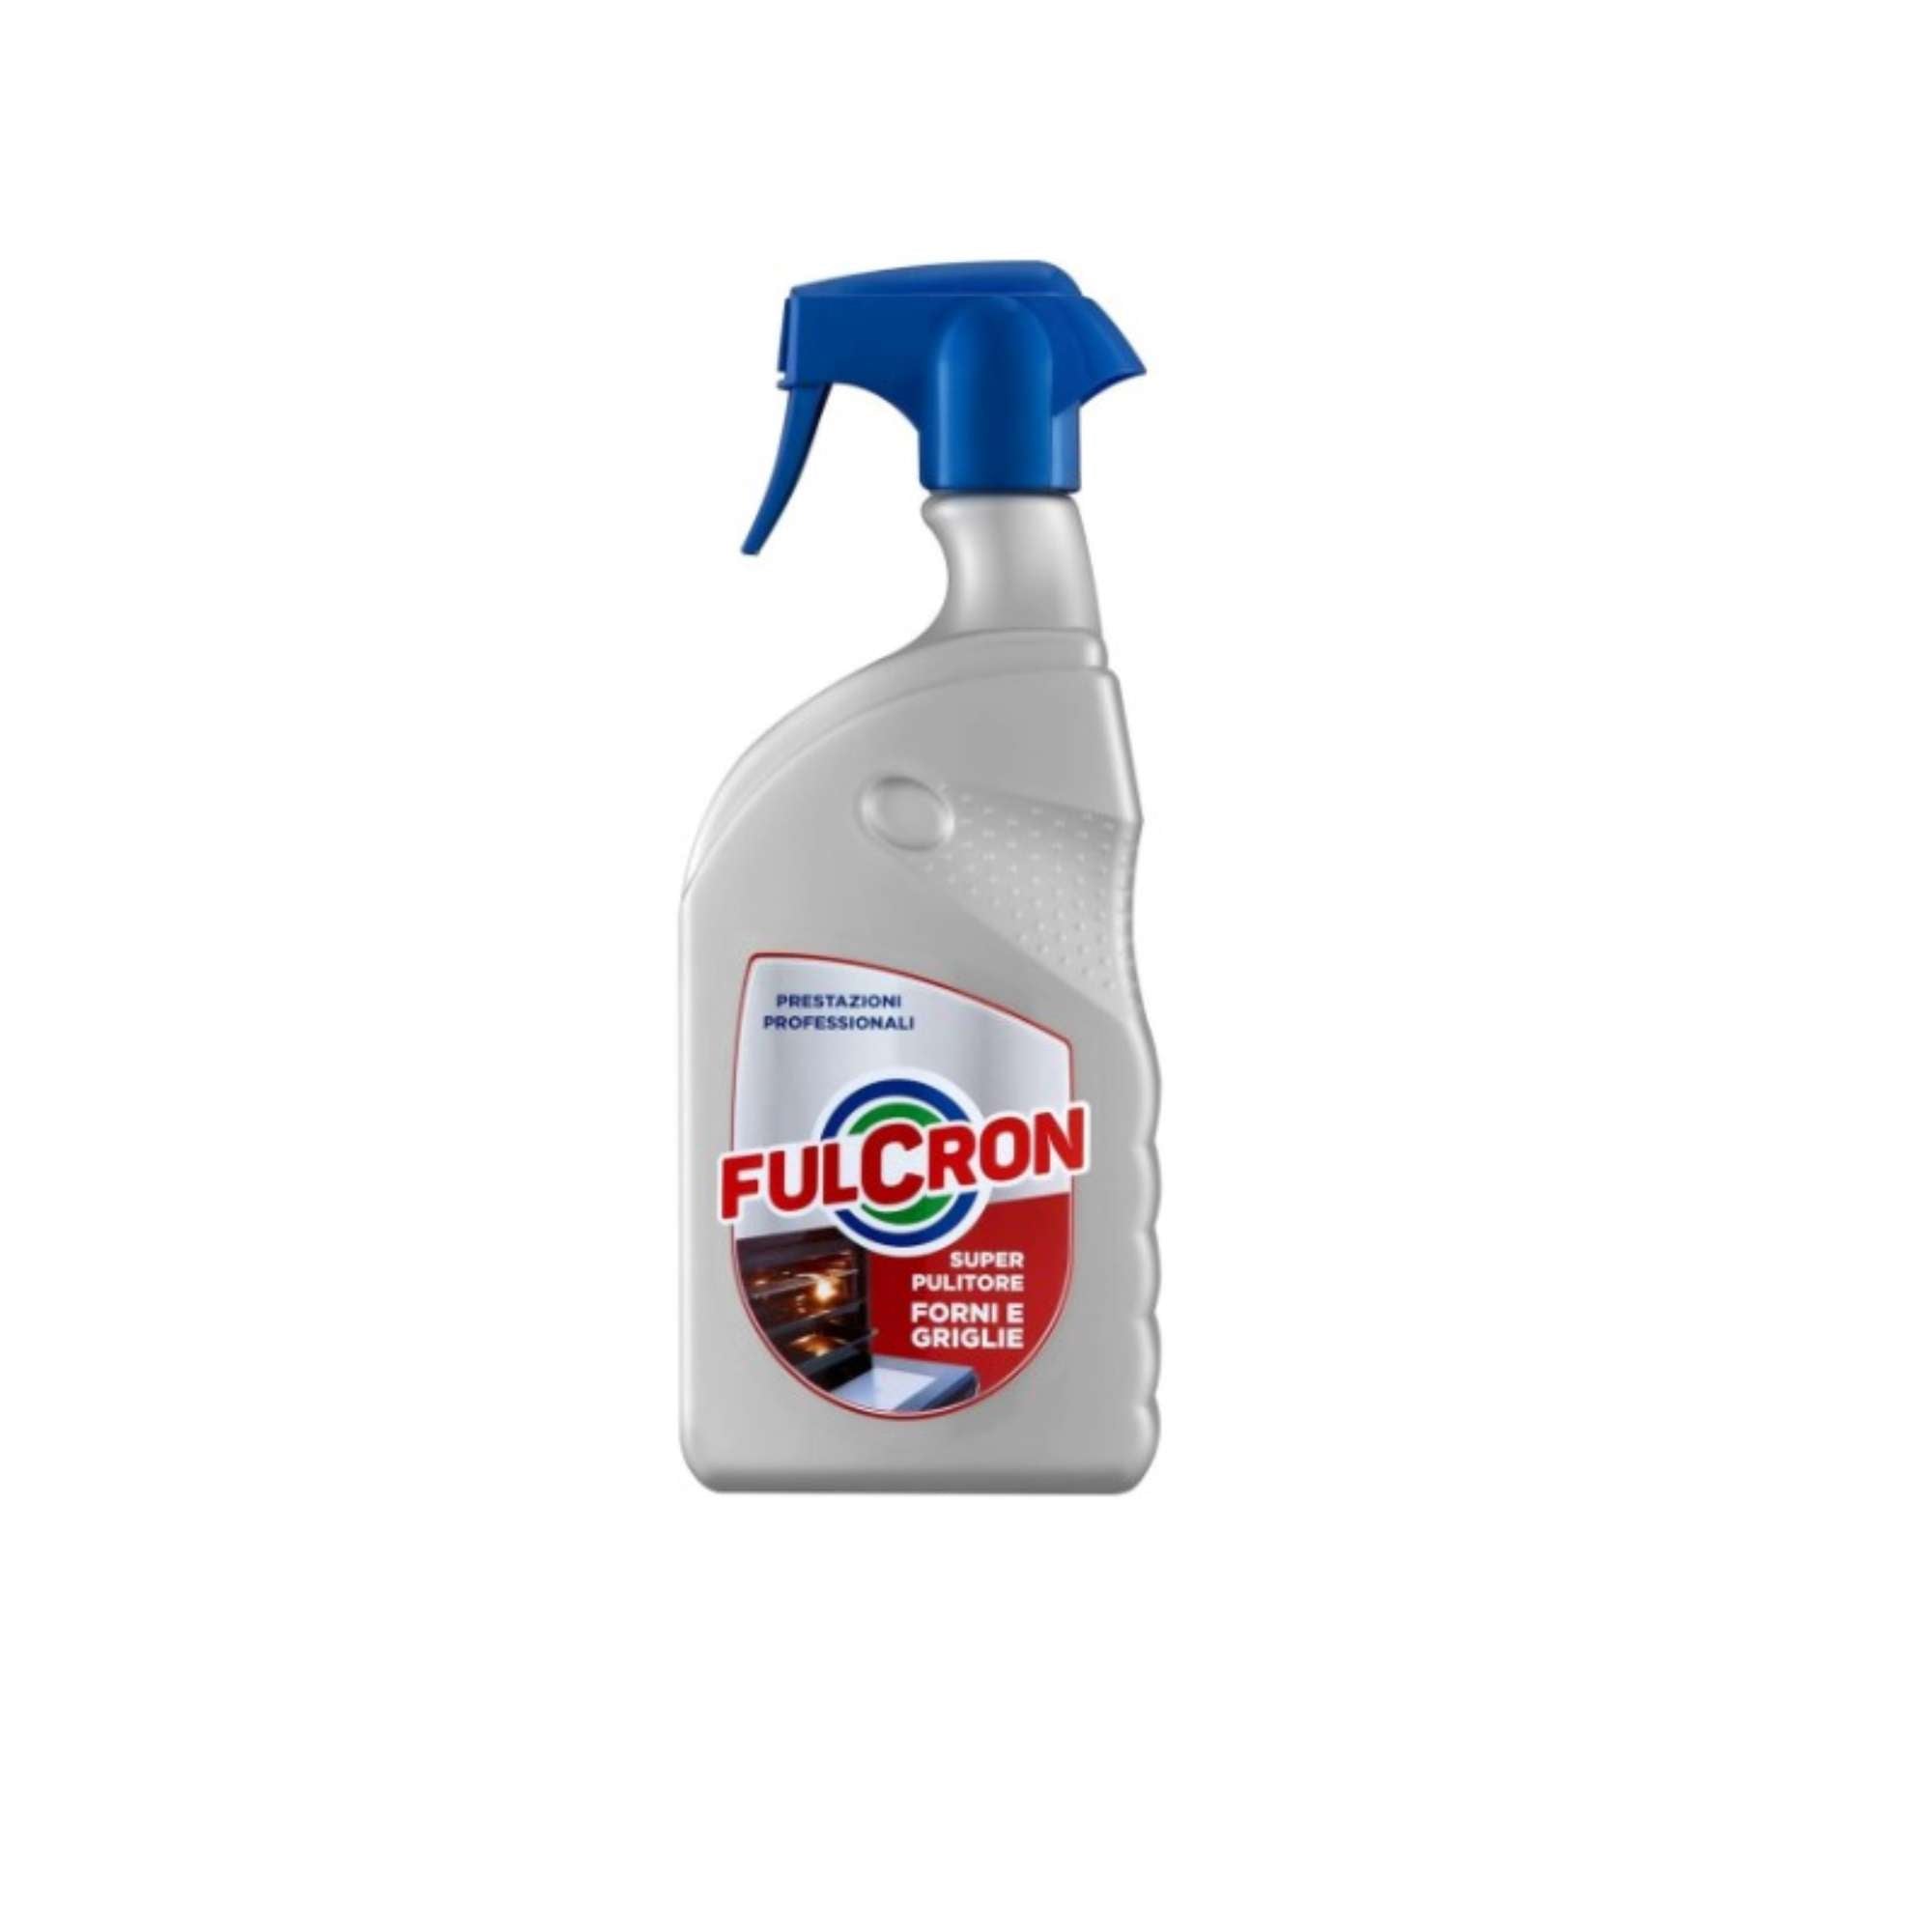 Fulcron Spray oven and grill cleaner 750 ml - Arexons 2561